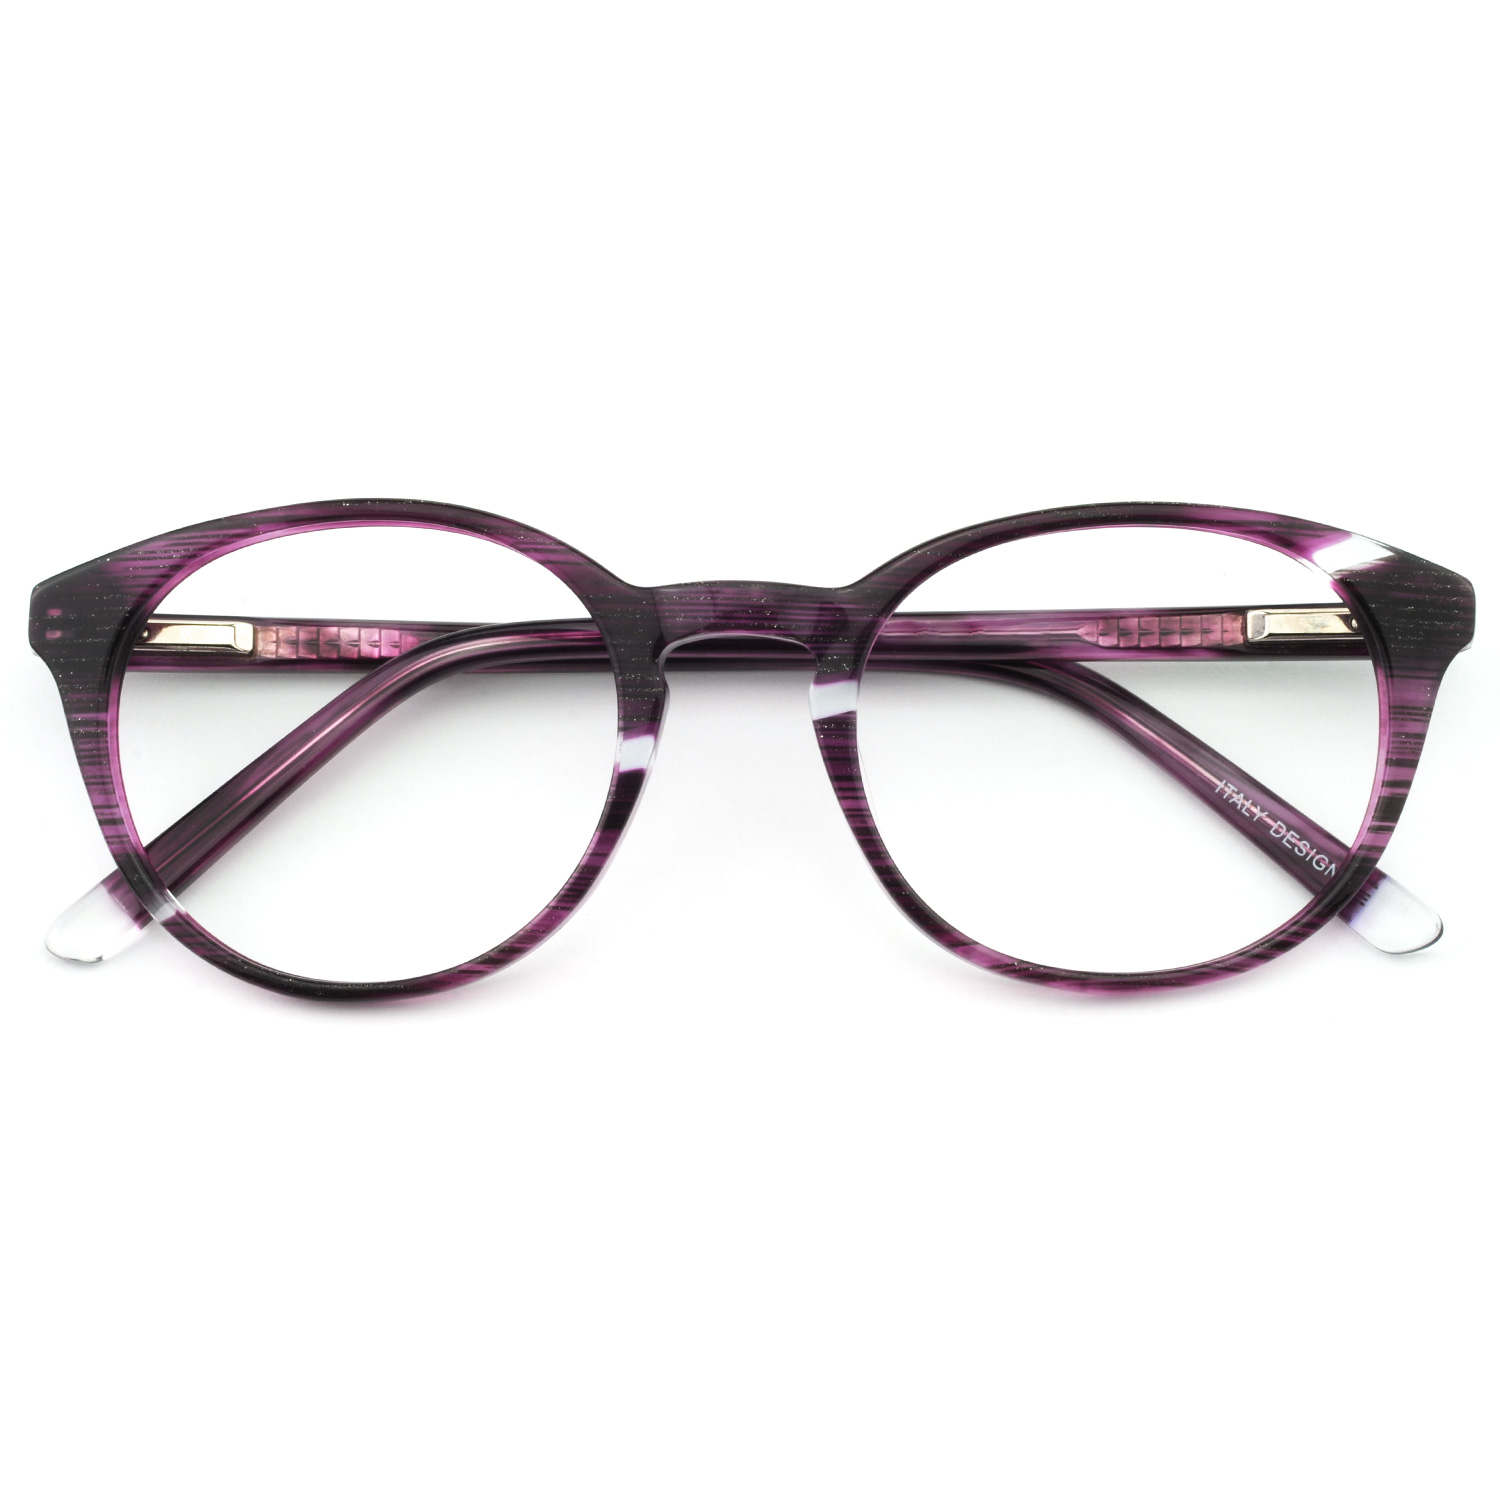 Round Cat Eye Acetate High Quality Fancy Small Women Optical Frame Glasses